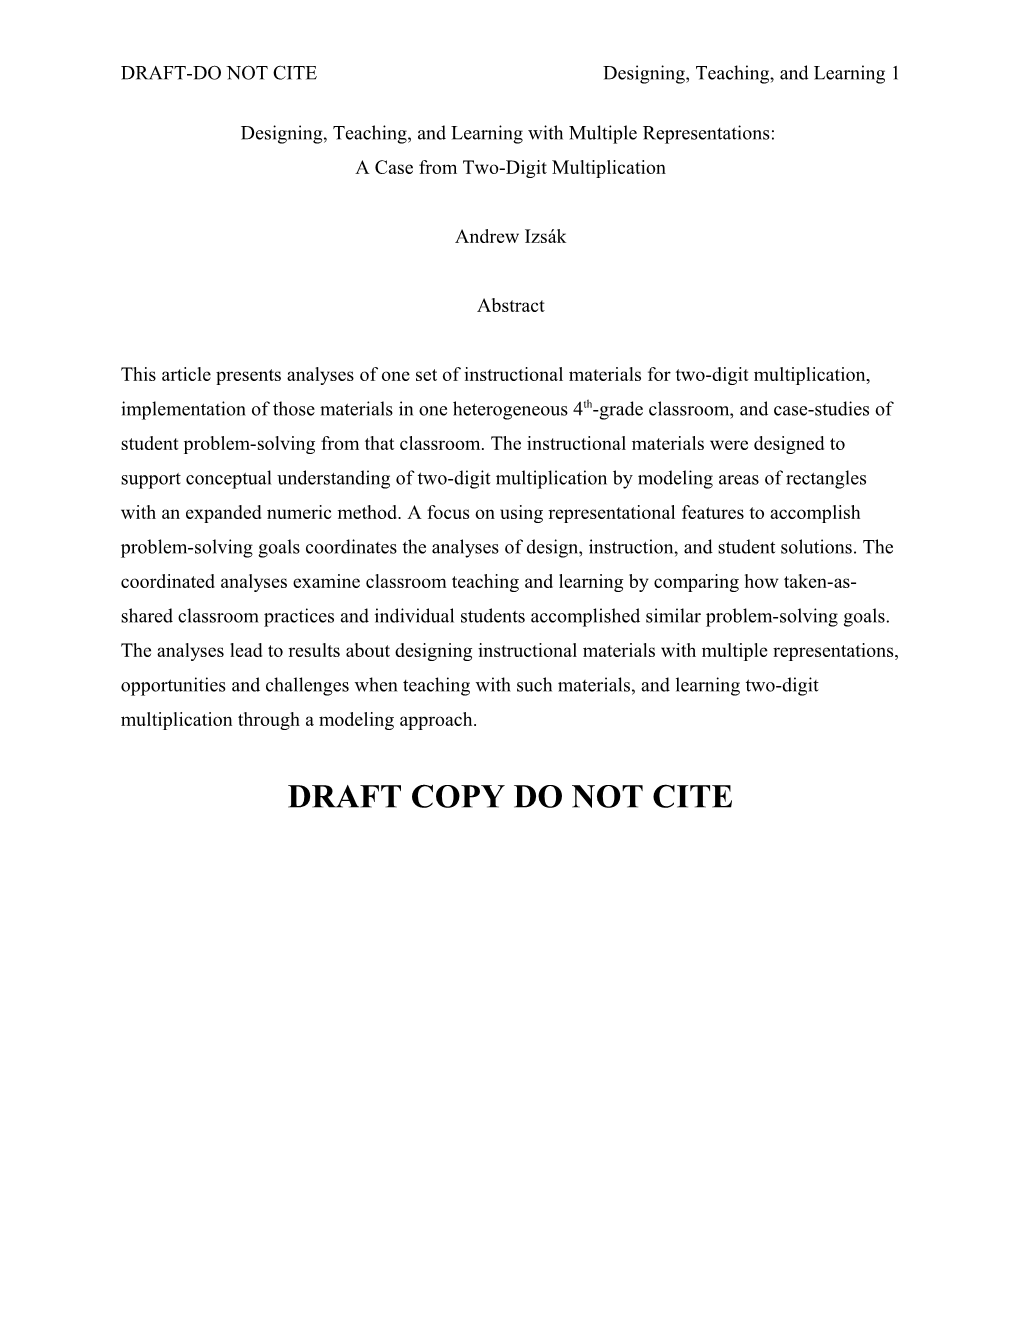 DRAFT-DO NOT CITE Designing, Teaching, and Learning 19